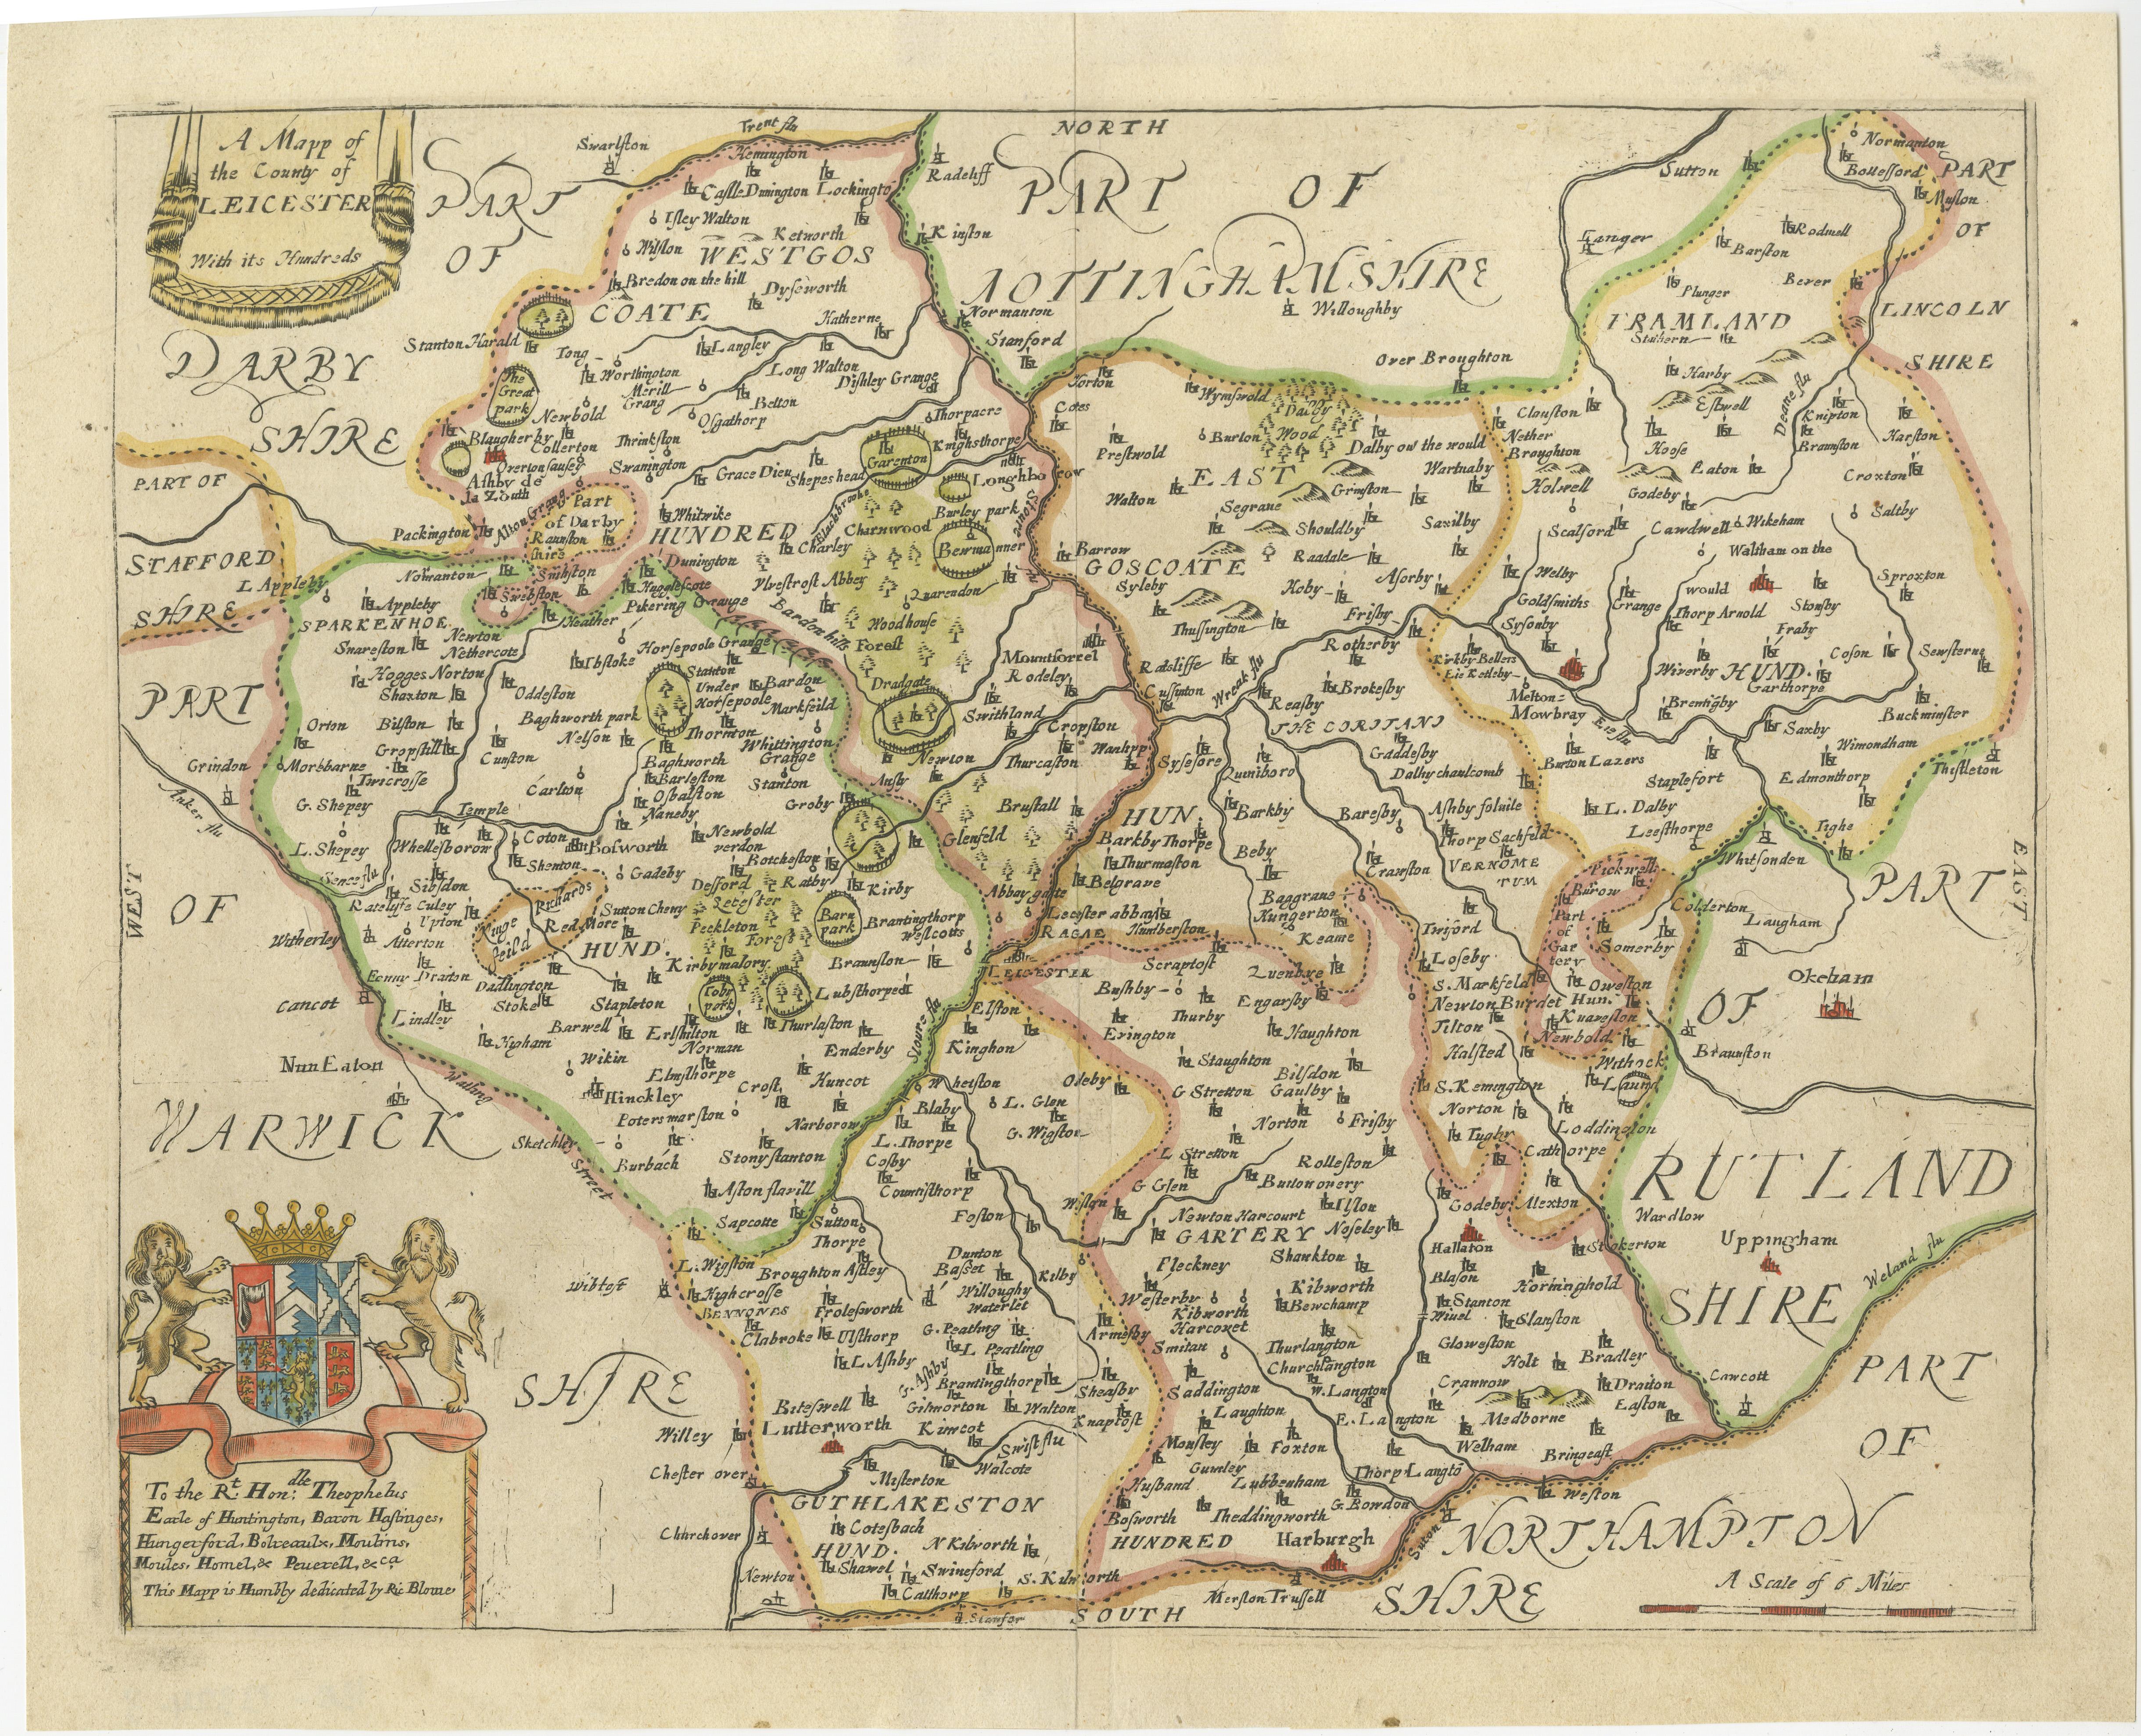 Antique map titled 'A Mapp of the Country of Leicester'. Original old map of Leicestershire, England. This map originates from 'Britannia: or, a Geographical Description of the Kingdoms of England, Scotland, and Ireland with the Isles and